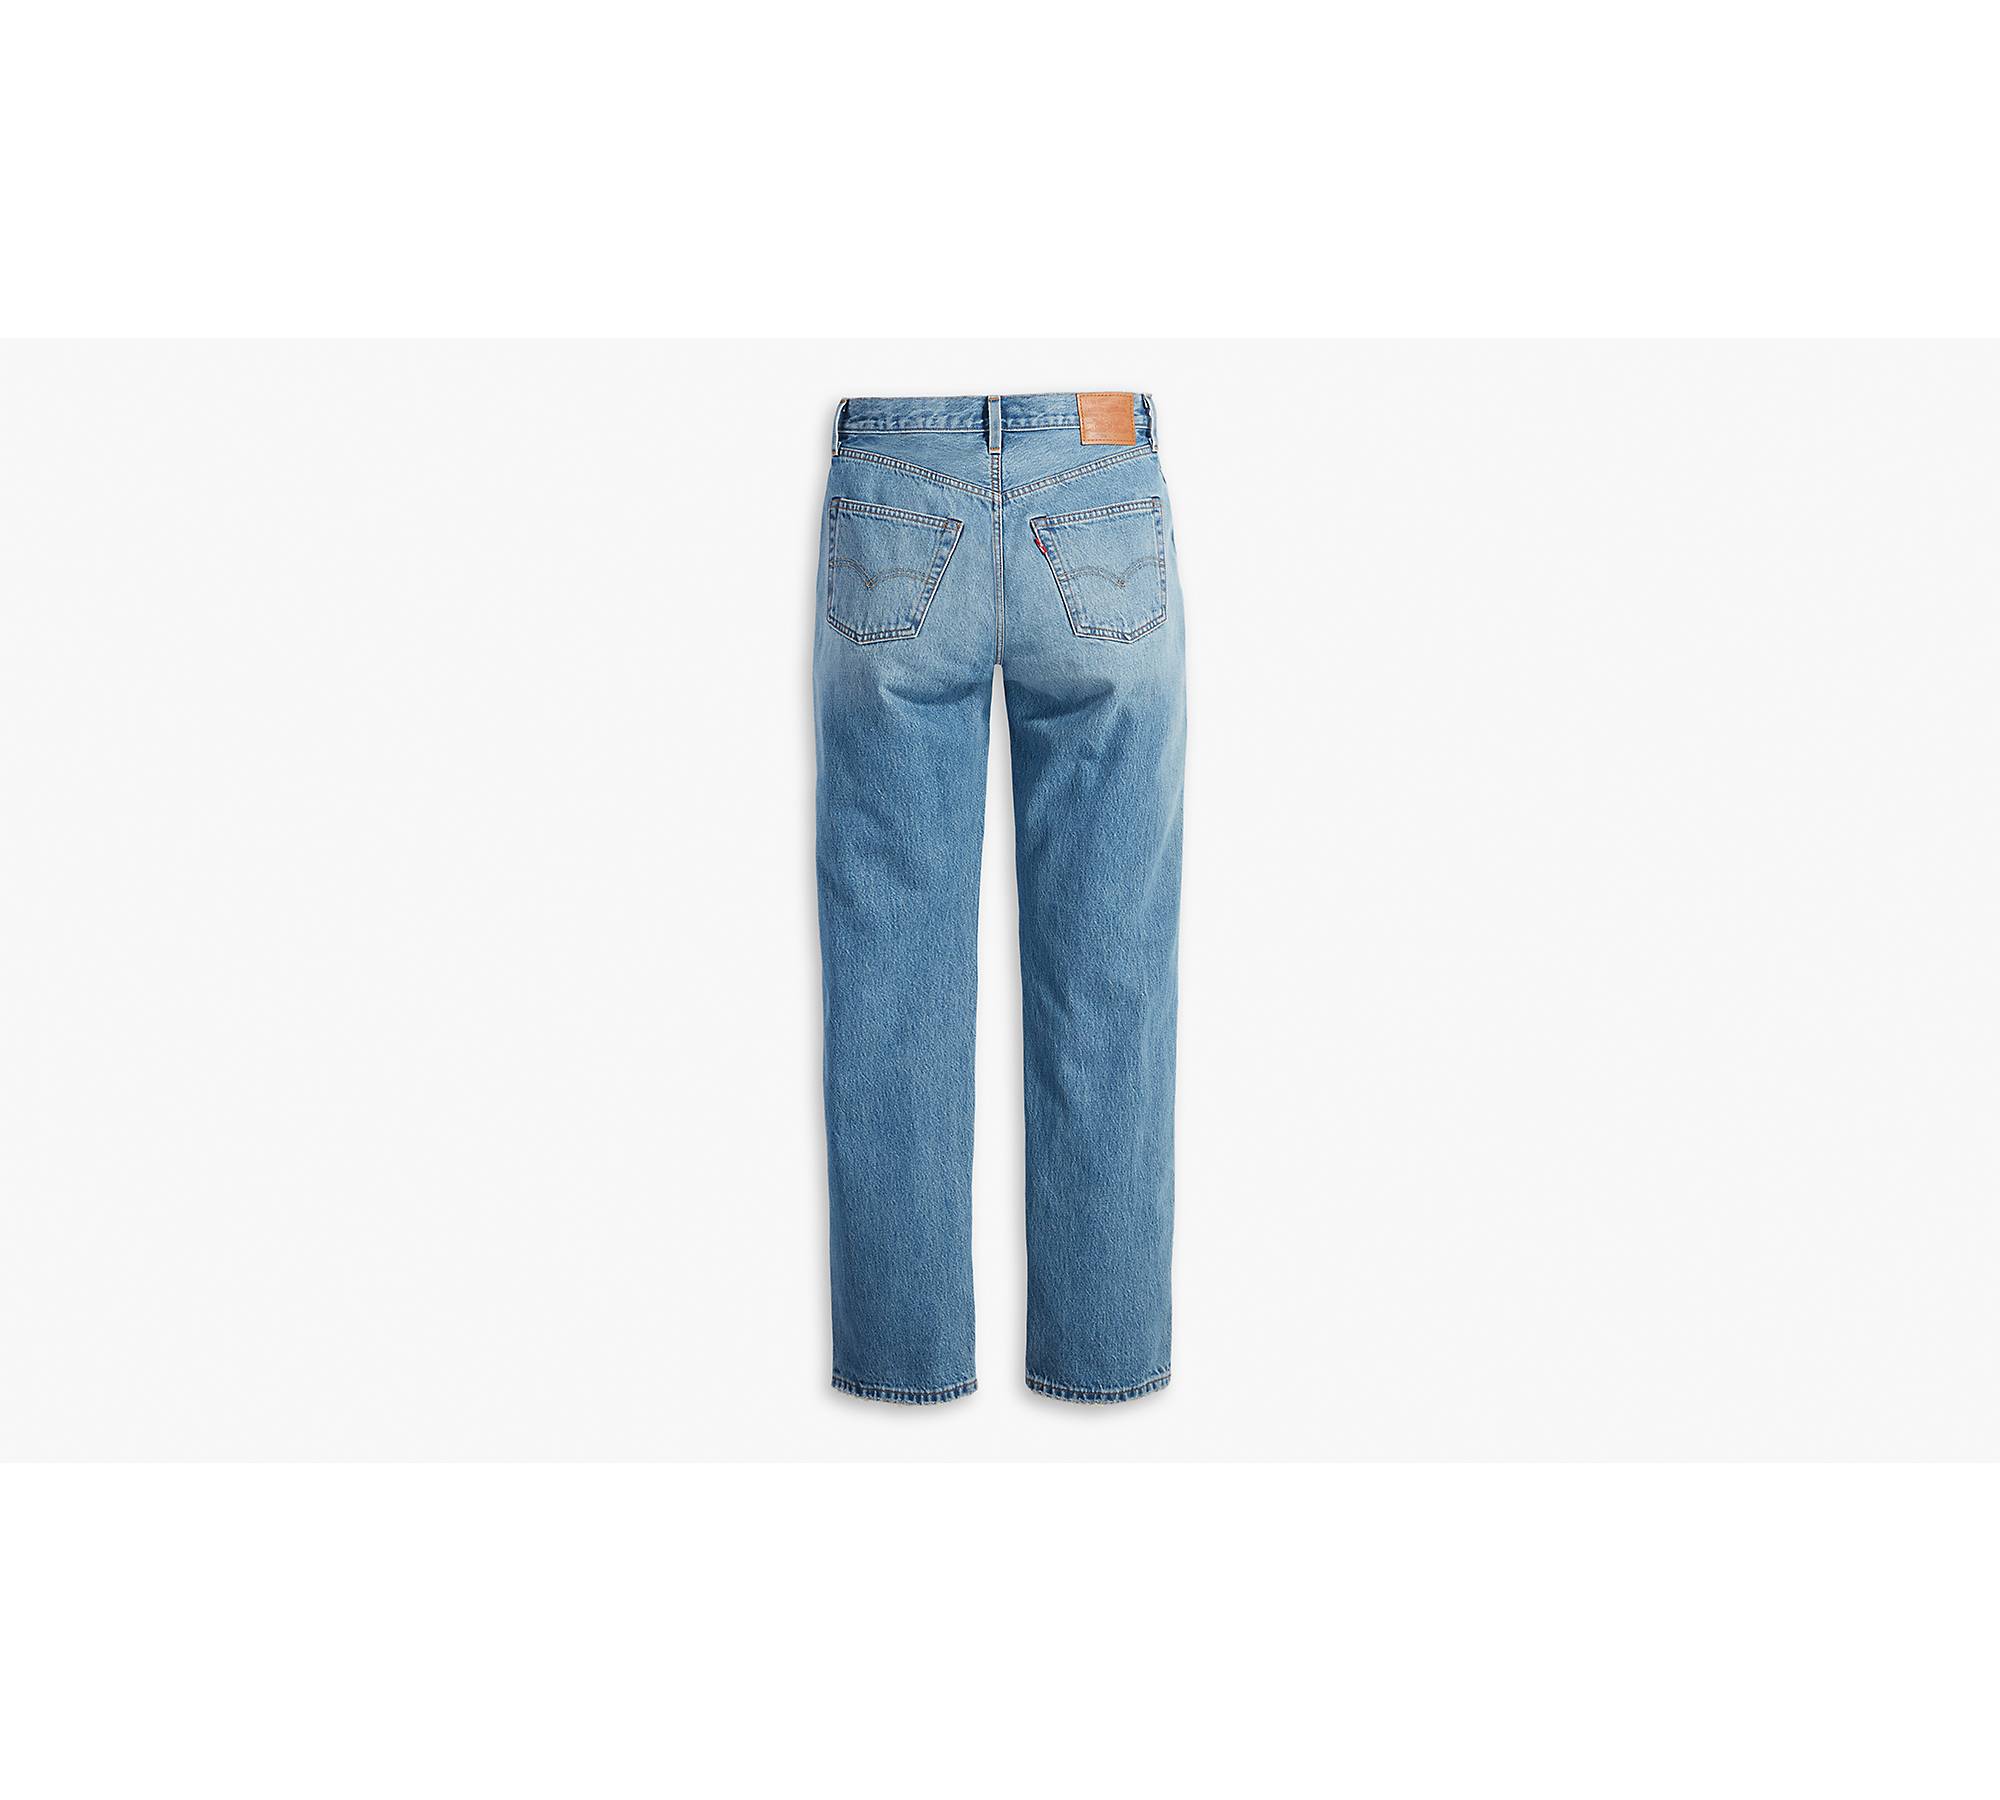 COBAIN HIGH WAISTED JEAN IN BLUE, JEANS